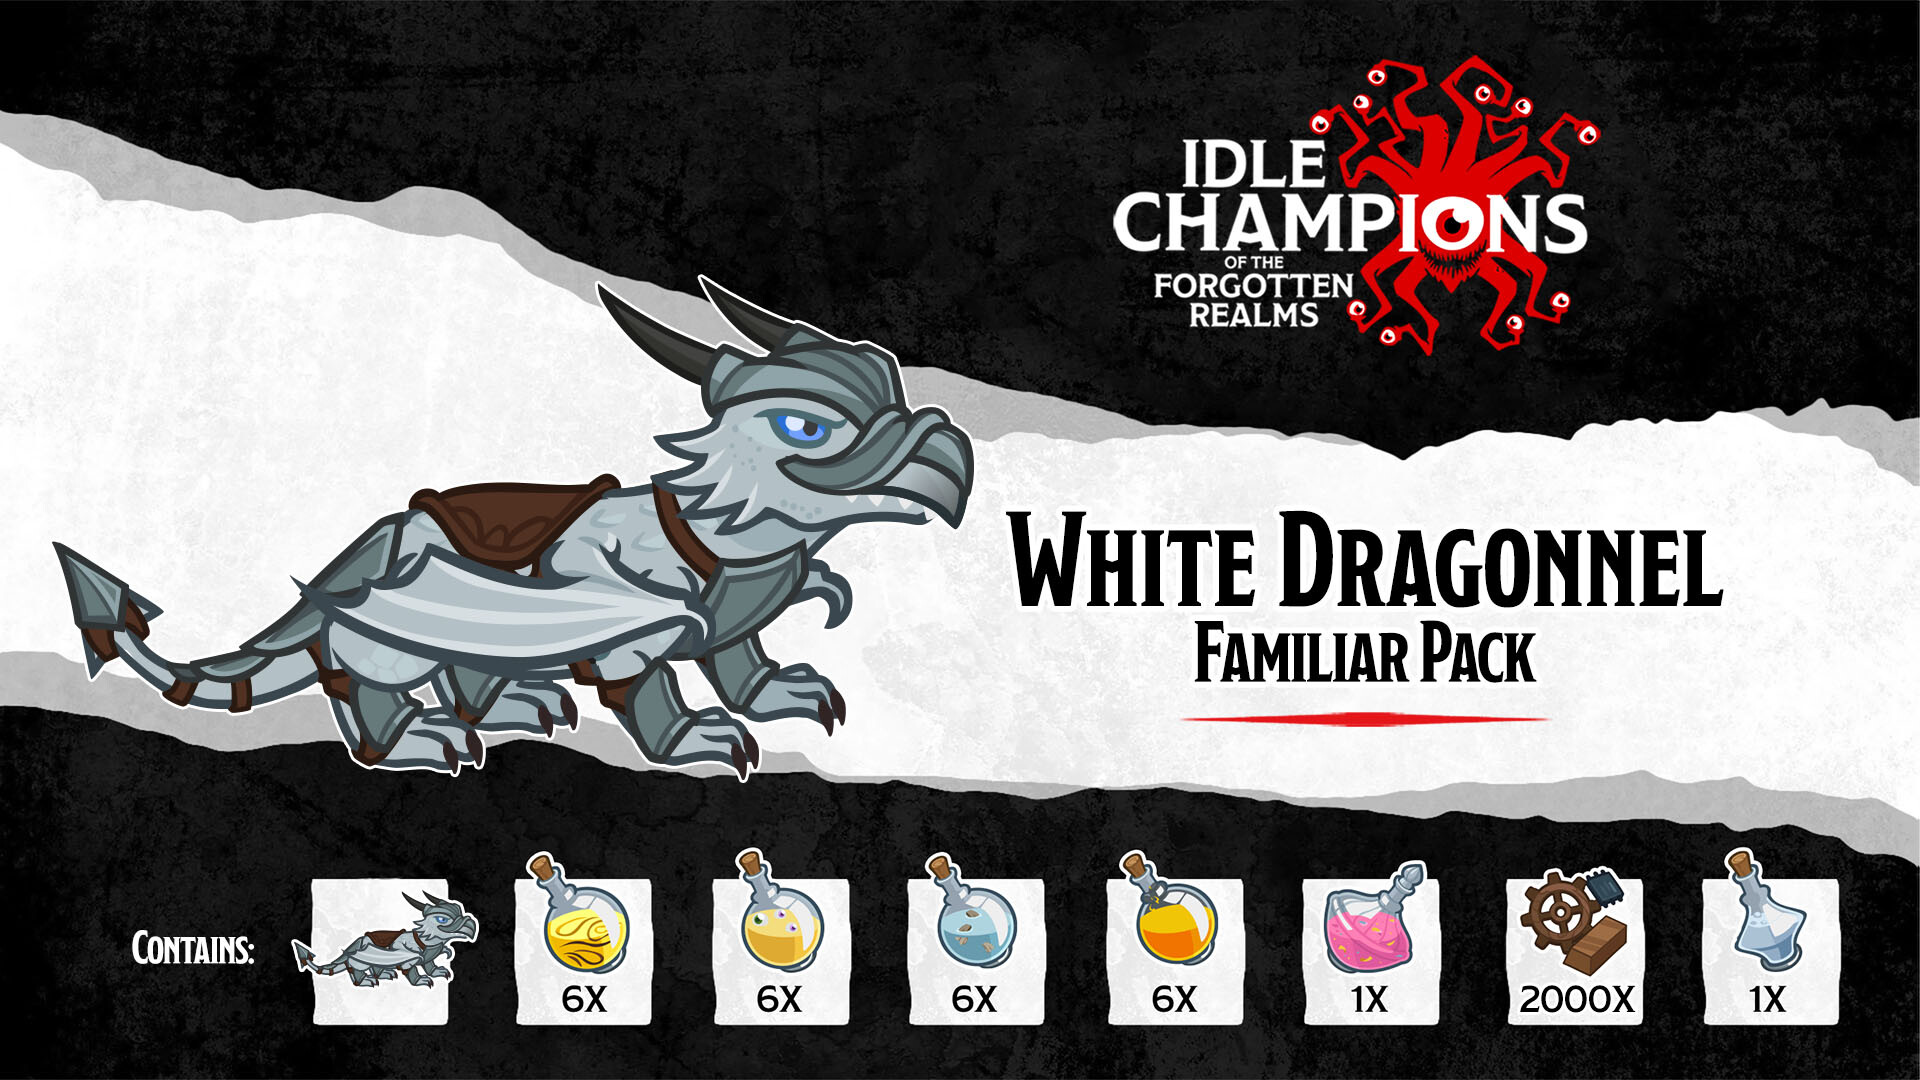 Idle Champions - White Dragonnel Familiar Pack Featured Screenshot #1